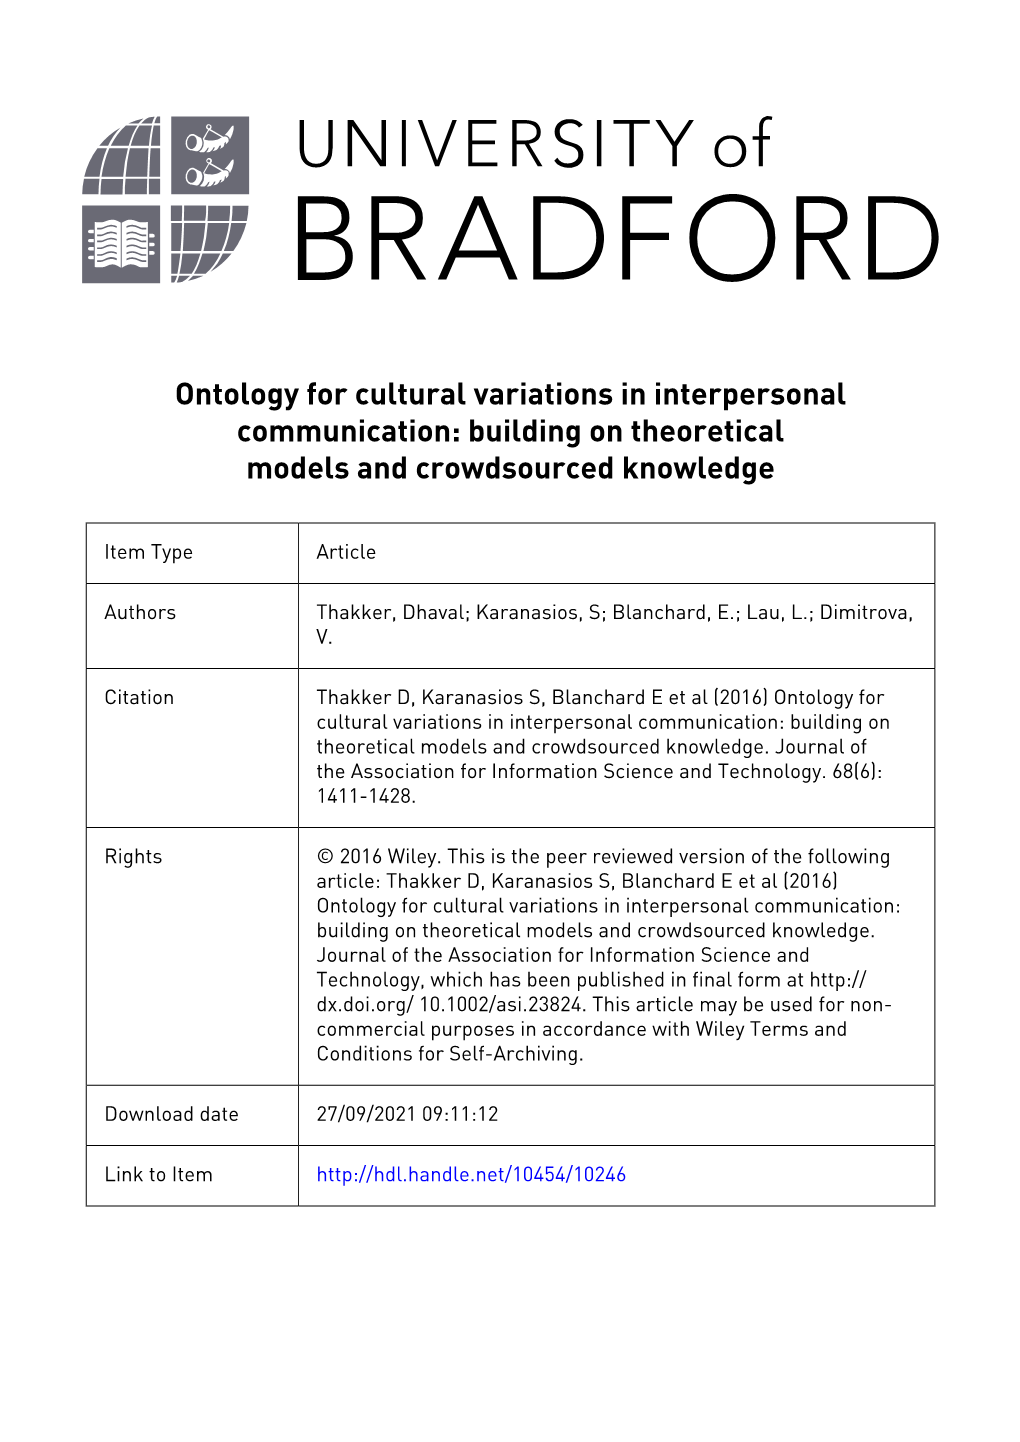 Ontology for Cultural Variations in Interpersonal Communication: Building on Theoretical Models and Crowdsourced Knowledge